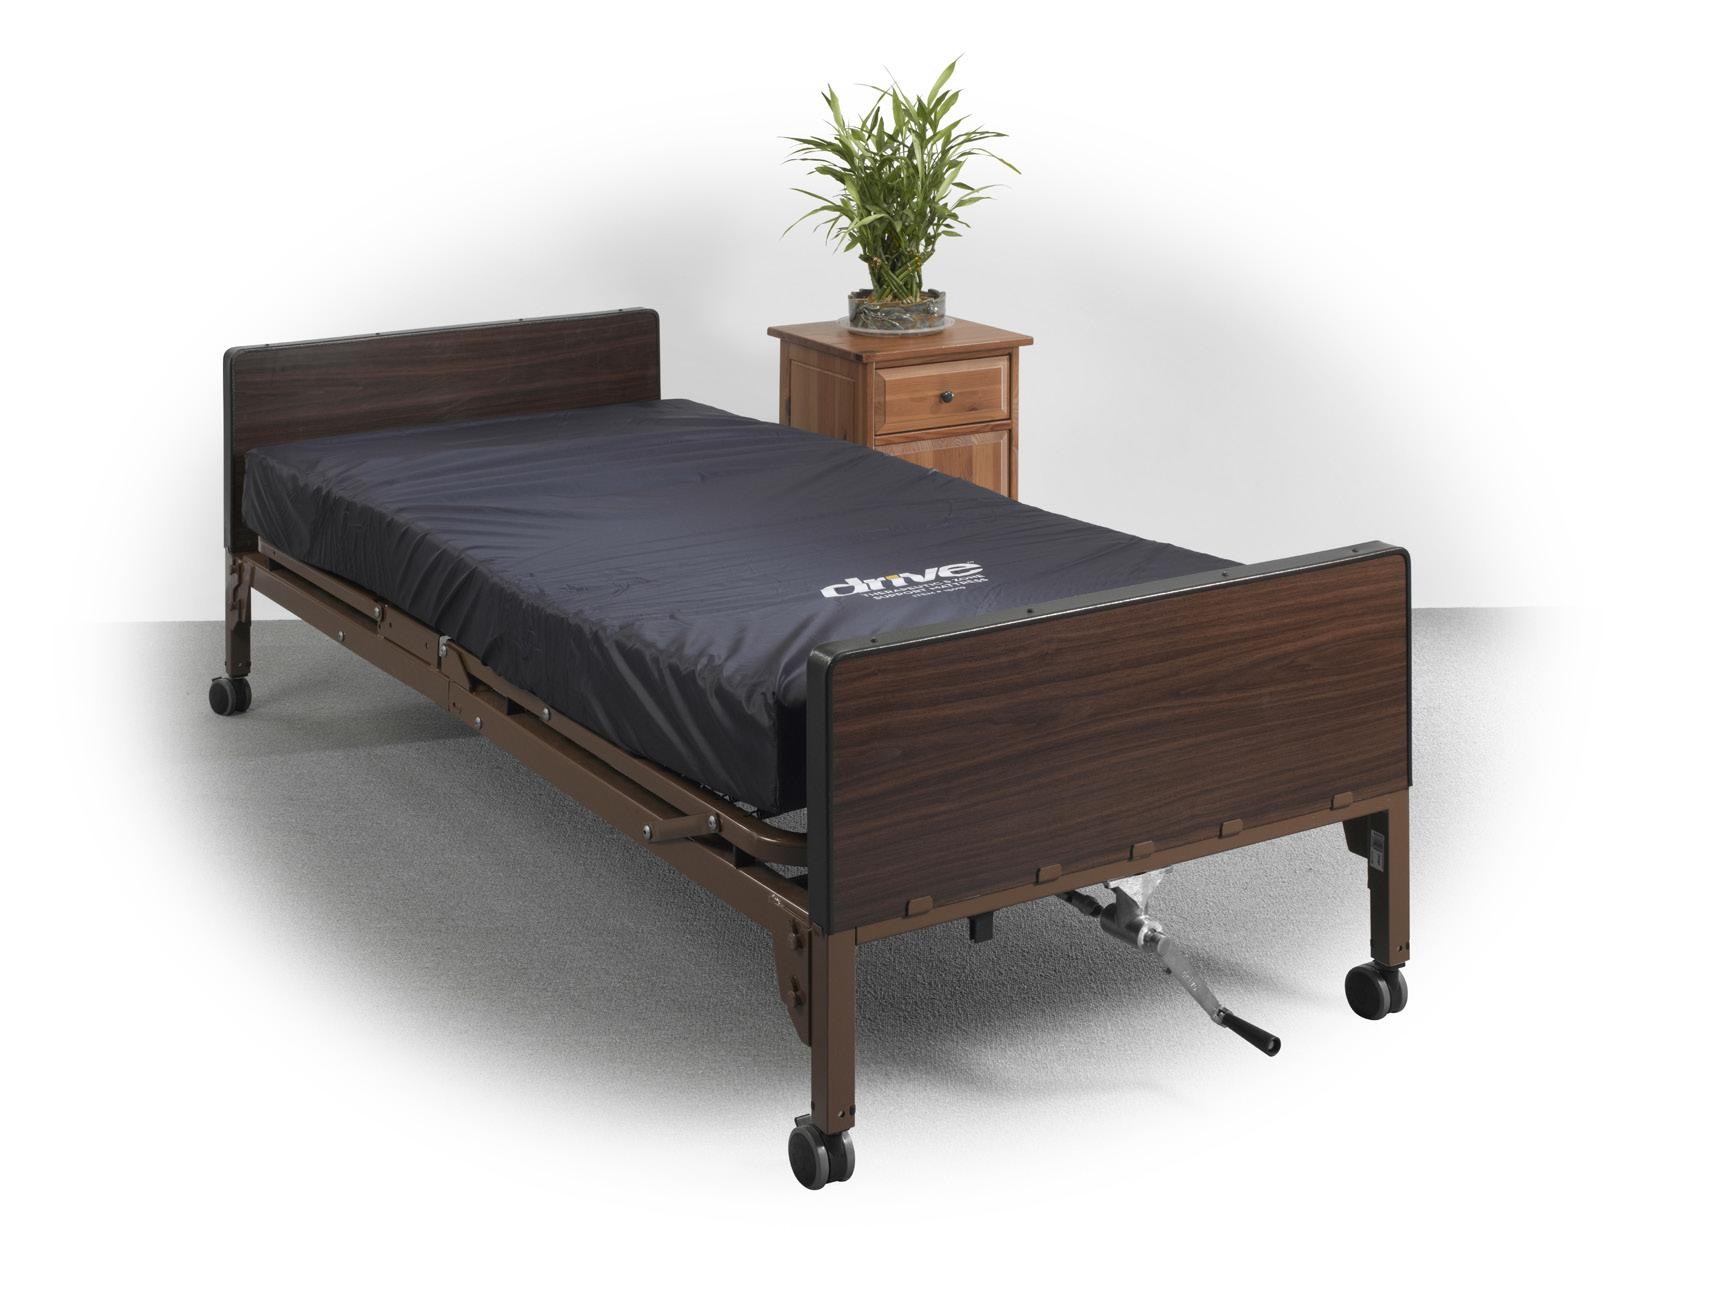 Therapeutic 5 Zone Support Mattress is in stock and available at On The Mend Medical Supply & Equipment